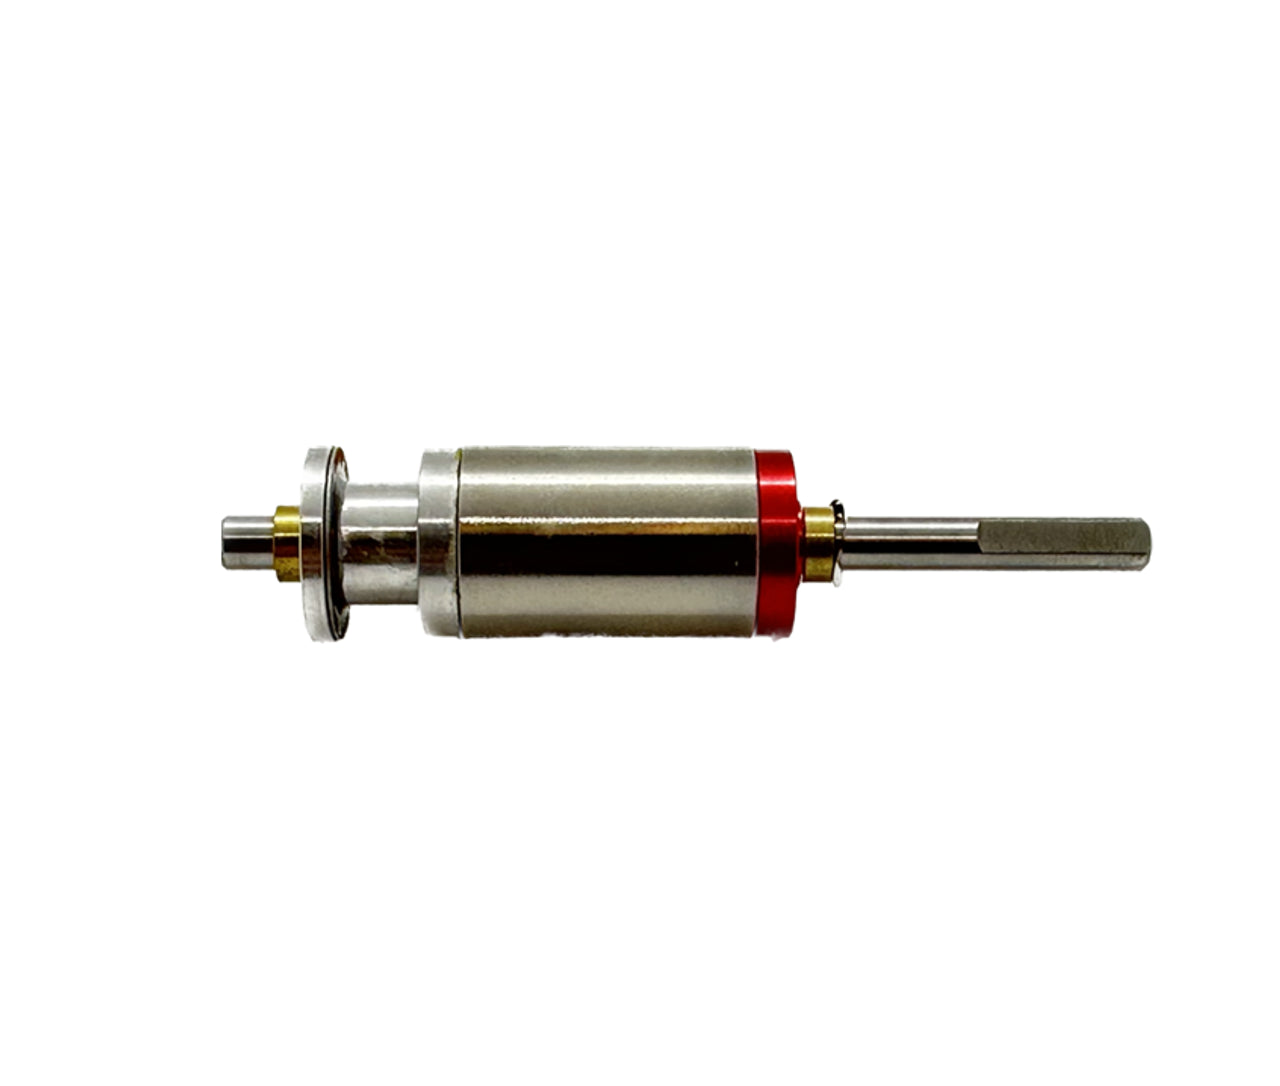 MCL4335 MACLAN DRK 4-POLE HIGH TORQUE ROTOR FOR 6600KV MOTOR 5MM SHAFT